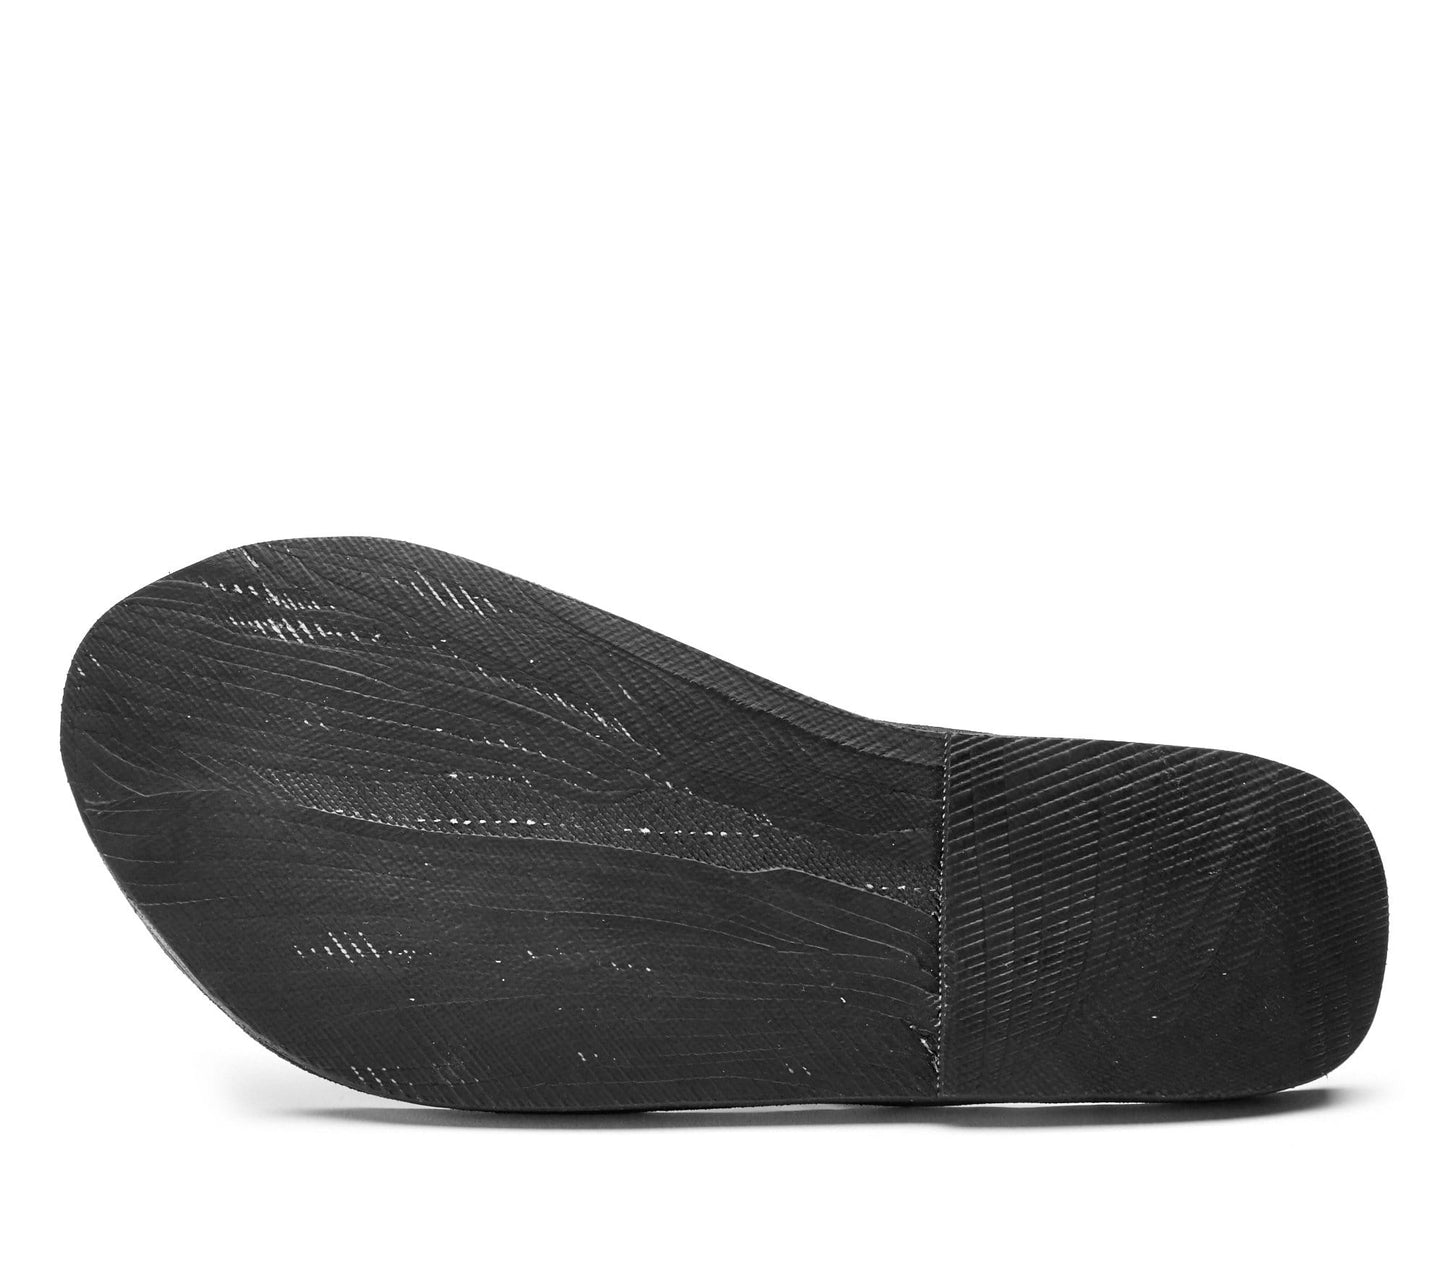 The Trenza Leather Flip Flop